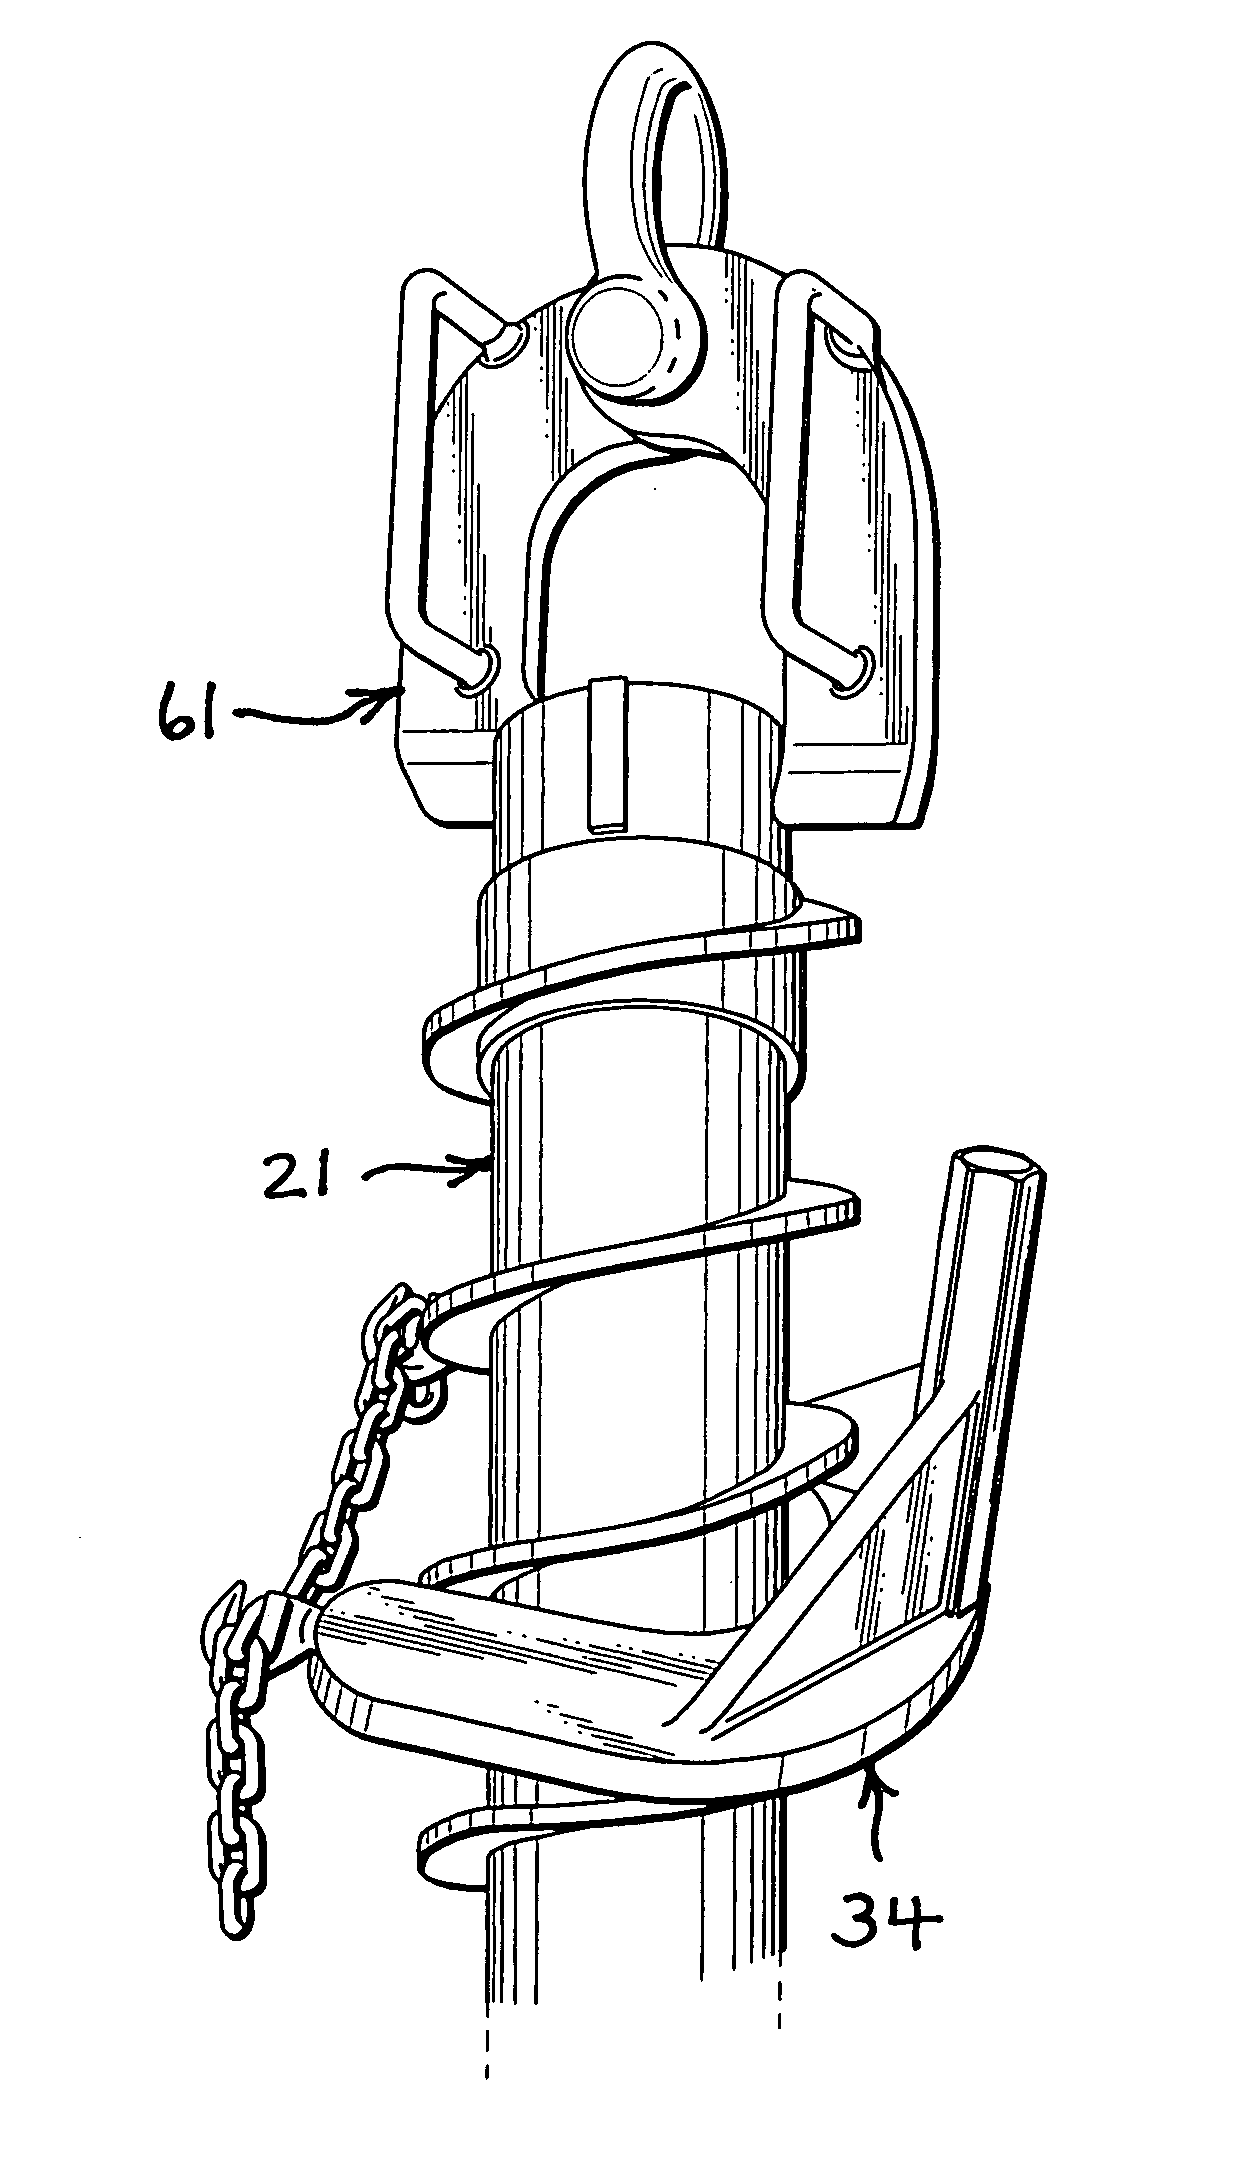 Accessories and method for hollow stem auger retraction